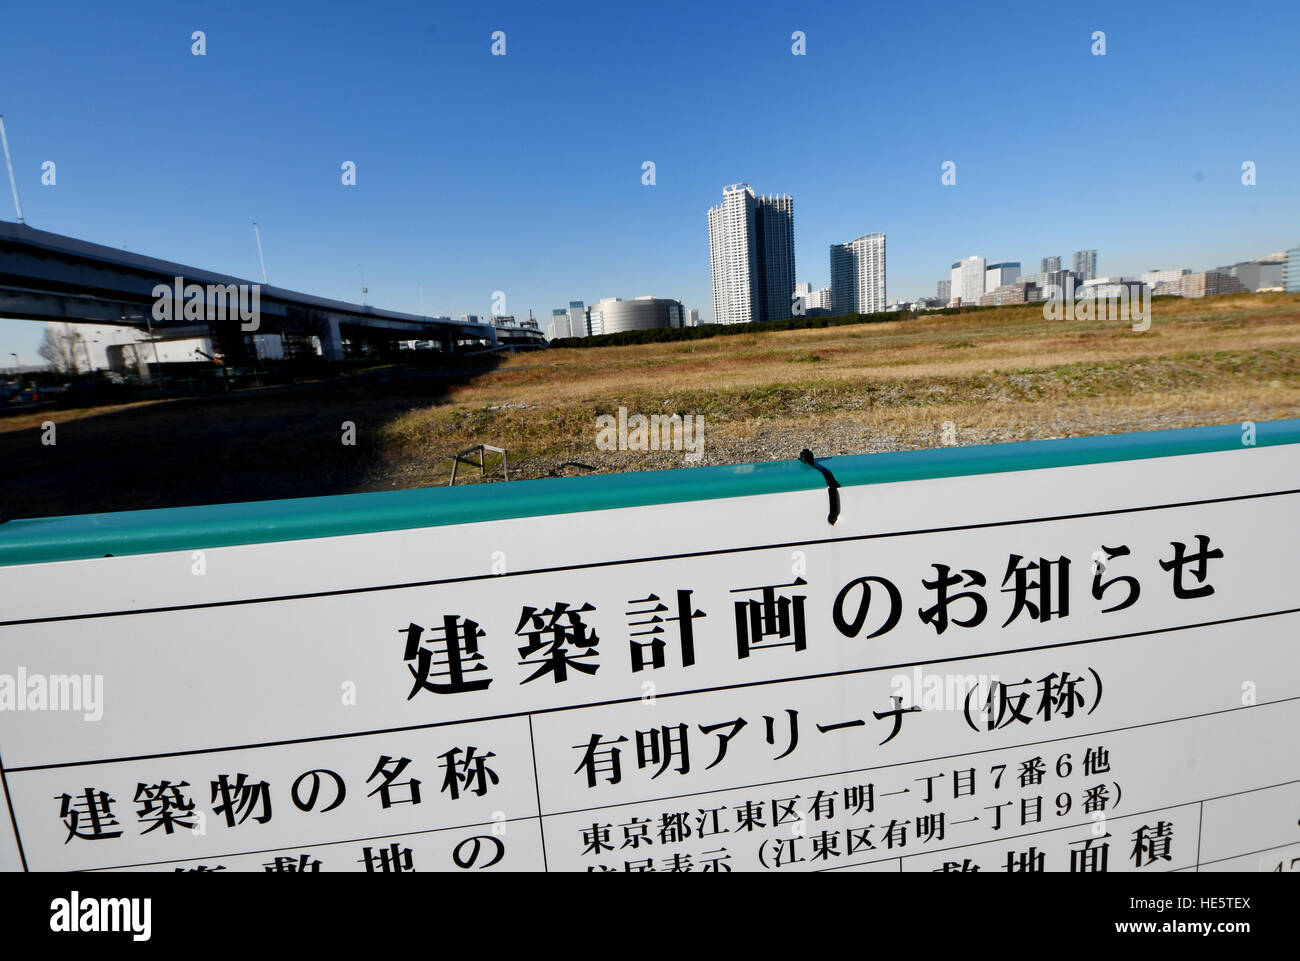 Tokyo, Japan. 17th Dec, 2016. A new volleyball arena for the 2020 Olympics will be built as originally planned at this empty lot in Tokyos waterfront, the City Hall said on Friday, December 16, 2016. The construction of Ariake Arena was part of the original plan for the Games but being under pressure to cut soaring costs, the city government was inclined to use an existing facility in nearby Yokohama. © Natsuki Sakai/AFLO/Alamy Live News Stock Photo